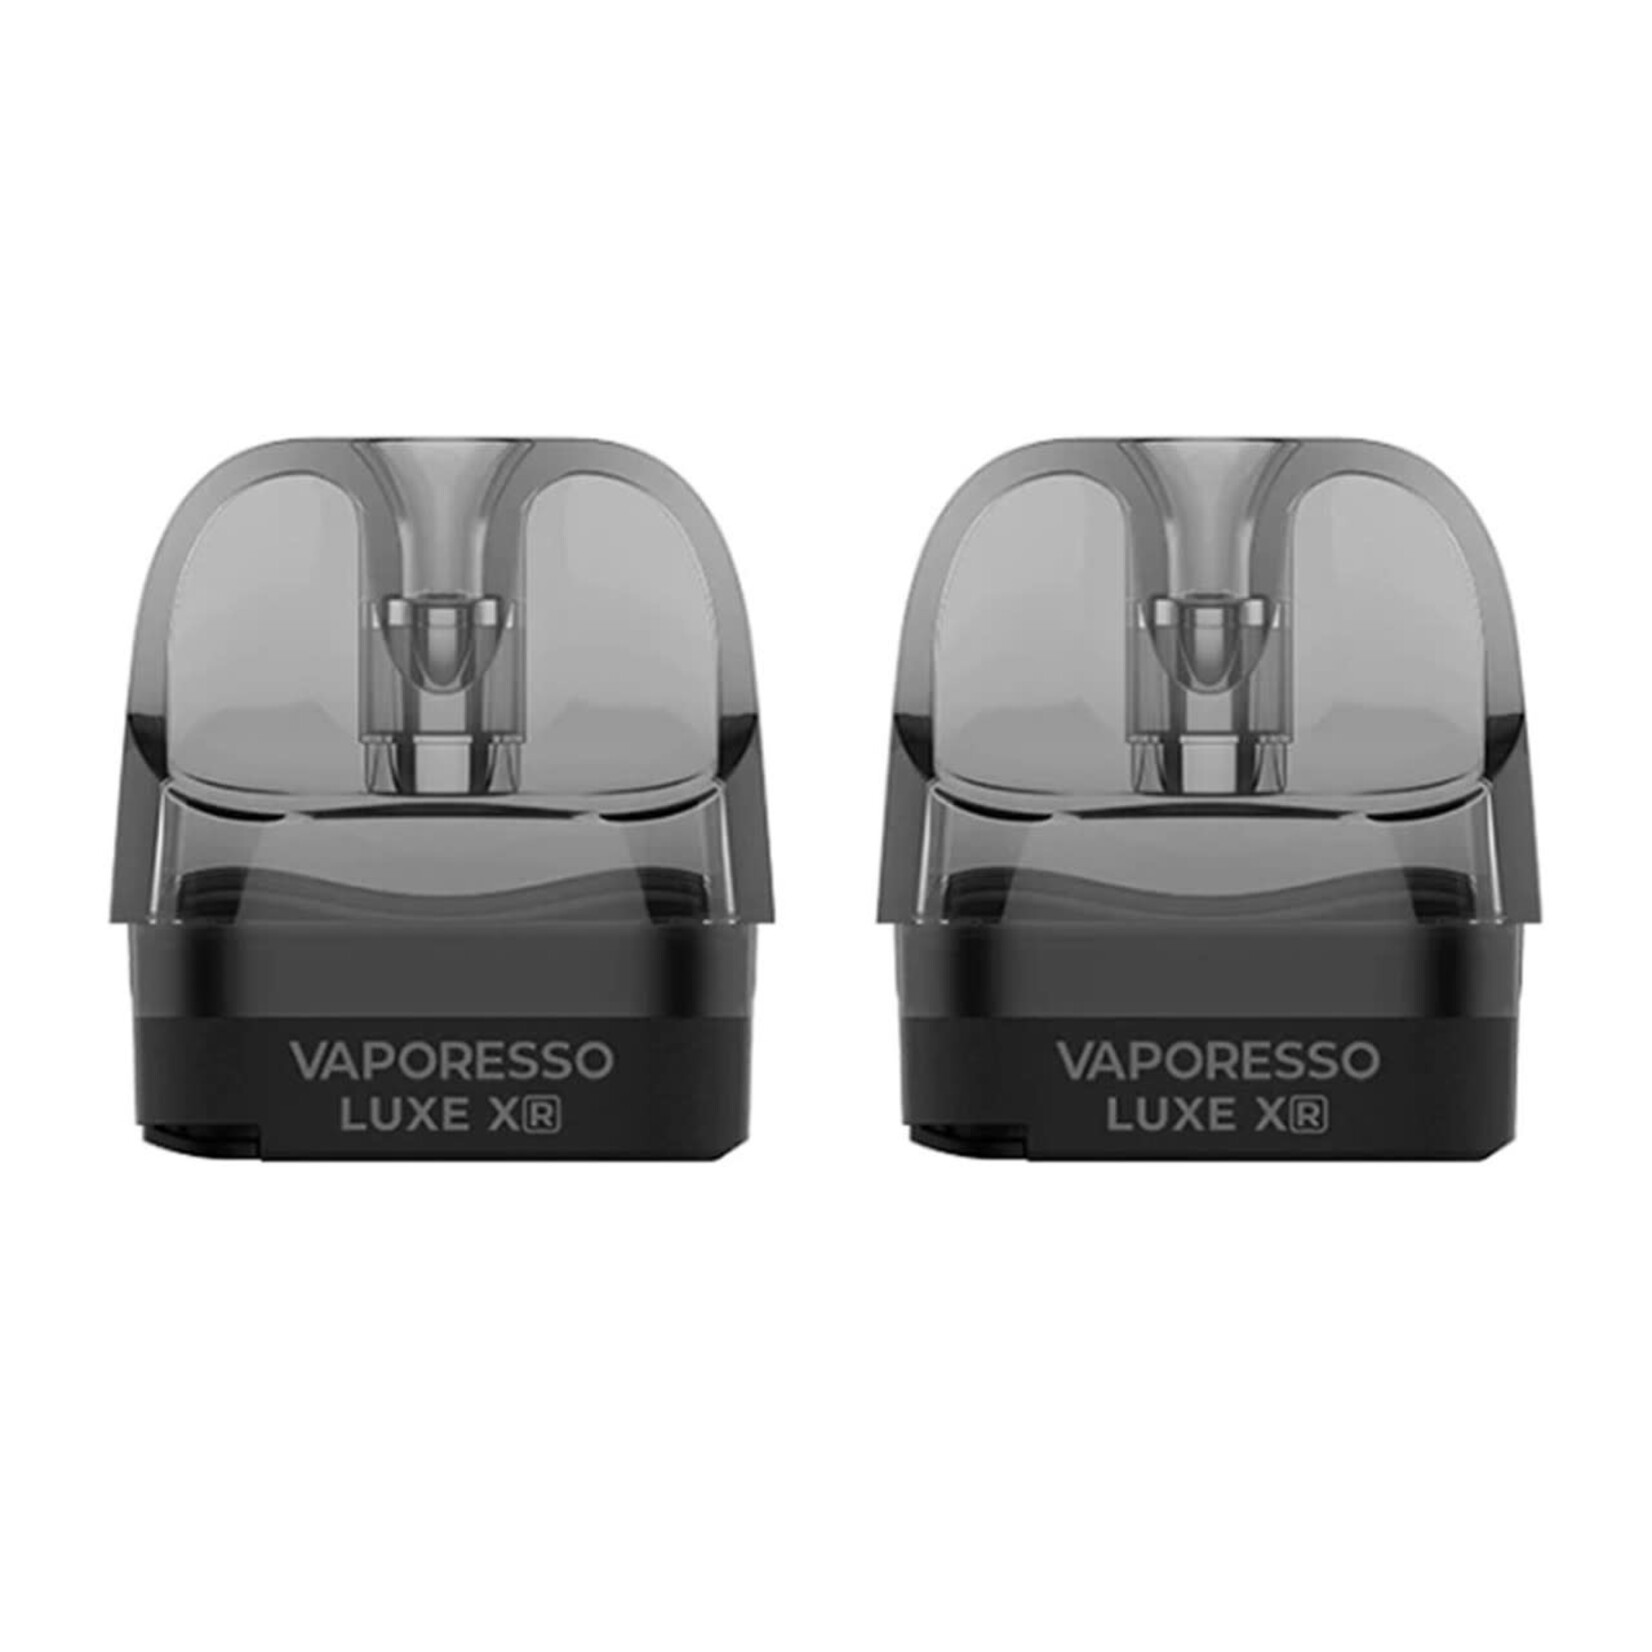 Vaporesso Vaporesso Luxe XR 5ML Refillable Replacement Pods - Pack of 2